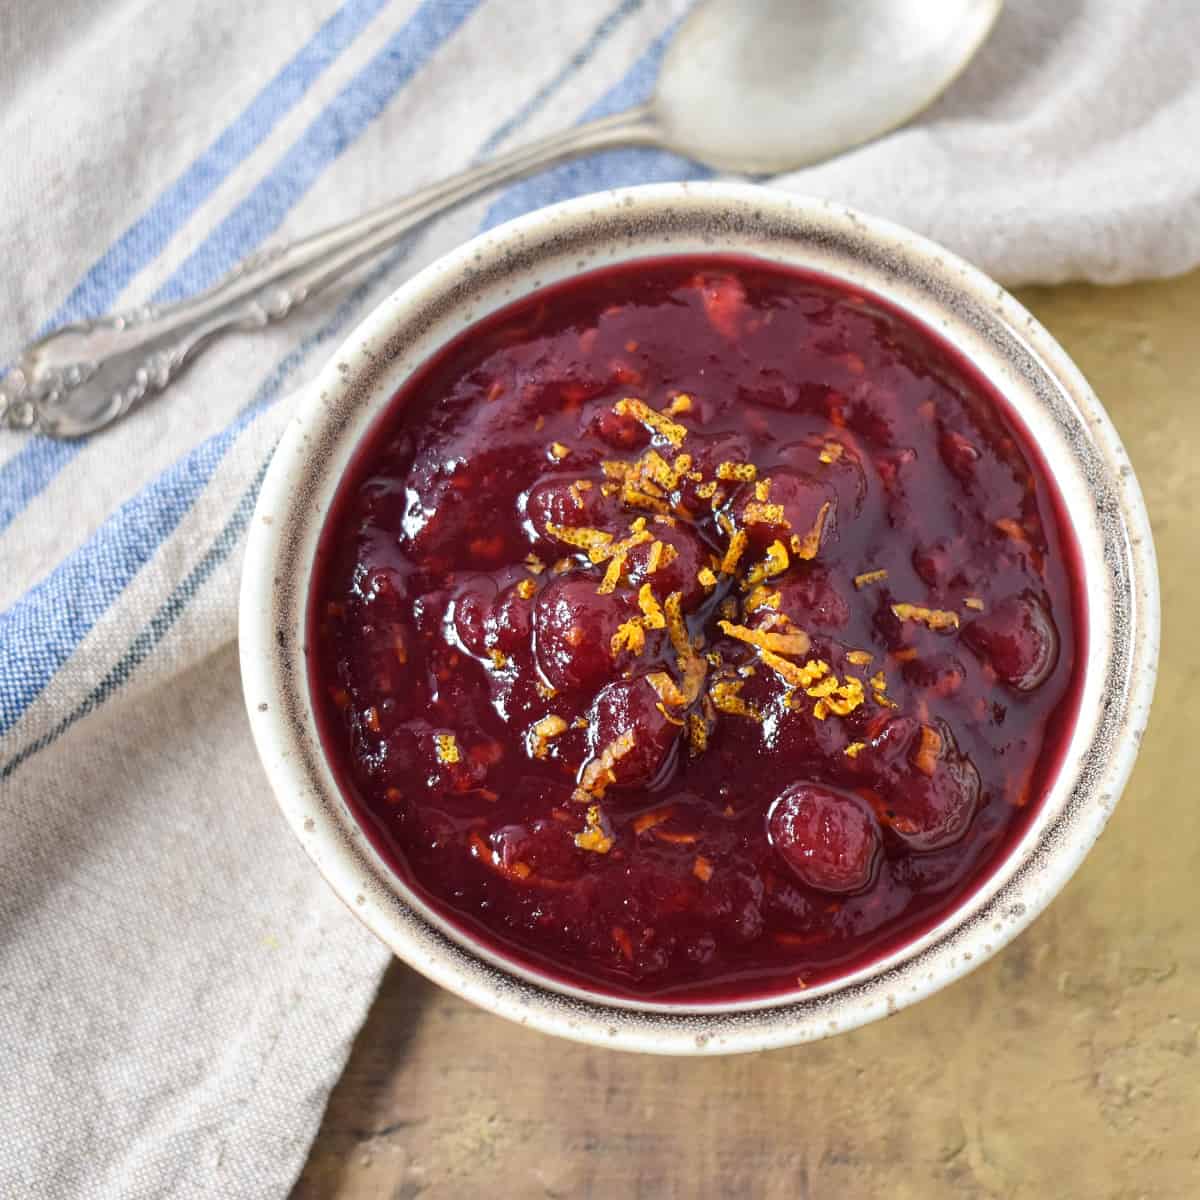 The cranberry orange sauce garnished with orange zest and served in a small beige bowl.